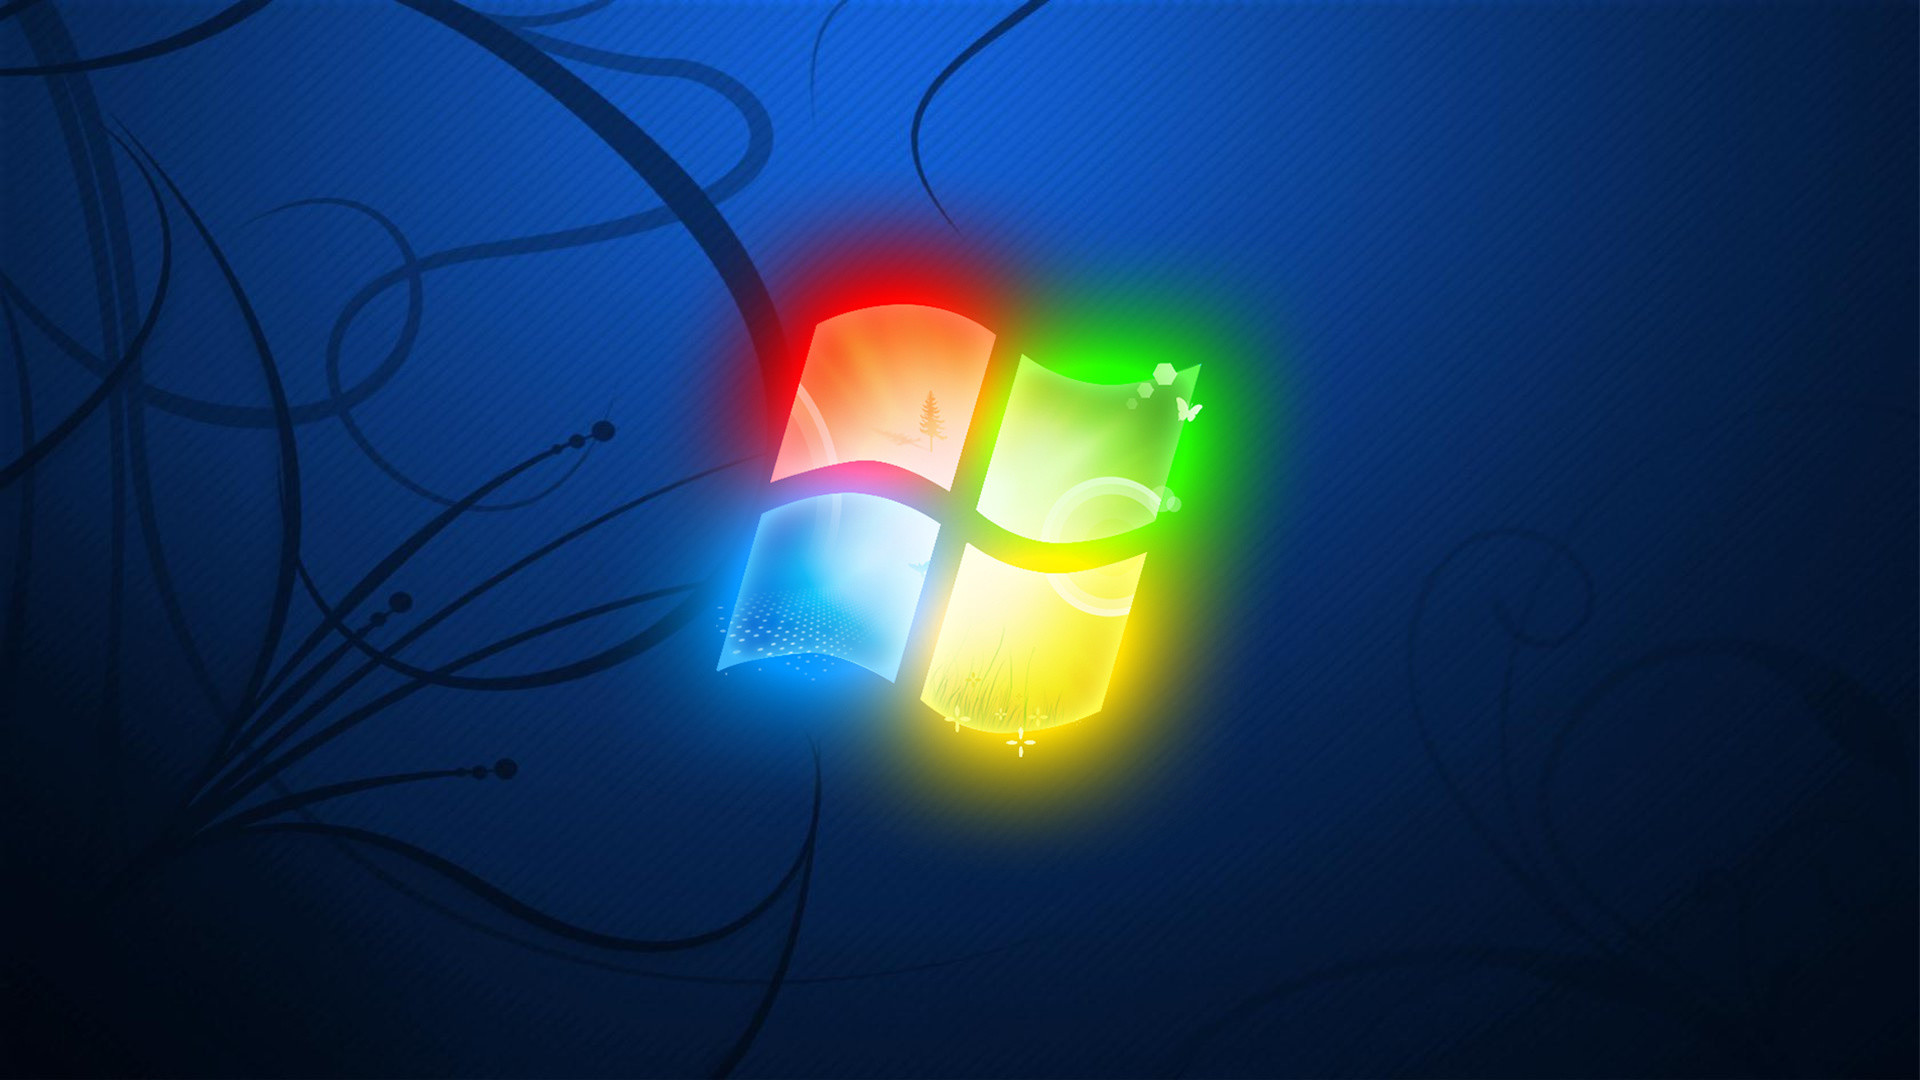 1920x1080 20 HD Windows Wallpapers Free Download